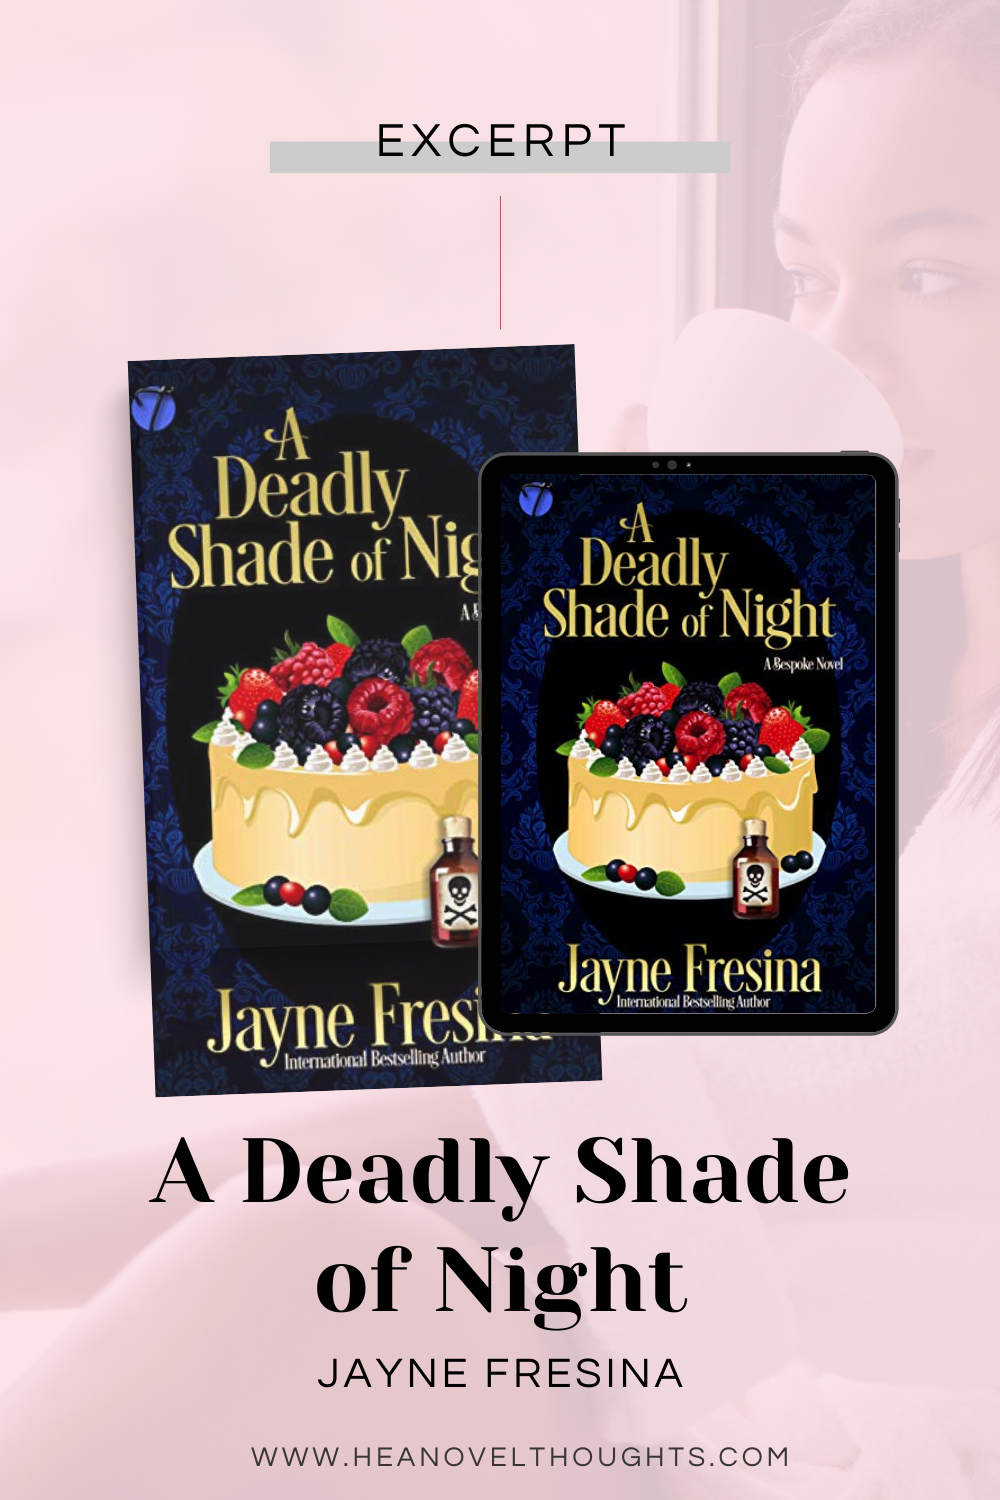 Exclusive Excerpt of A Deadly Shade of Night